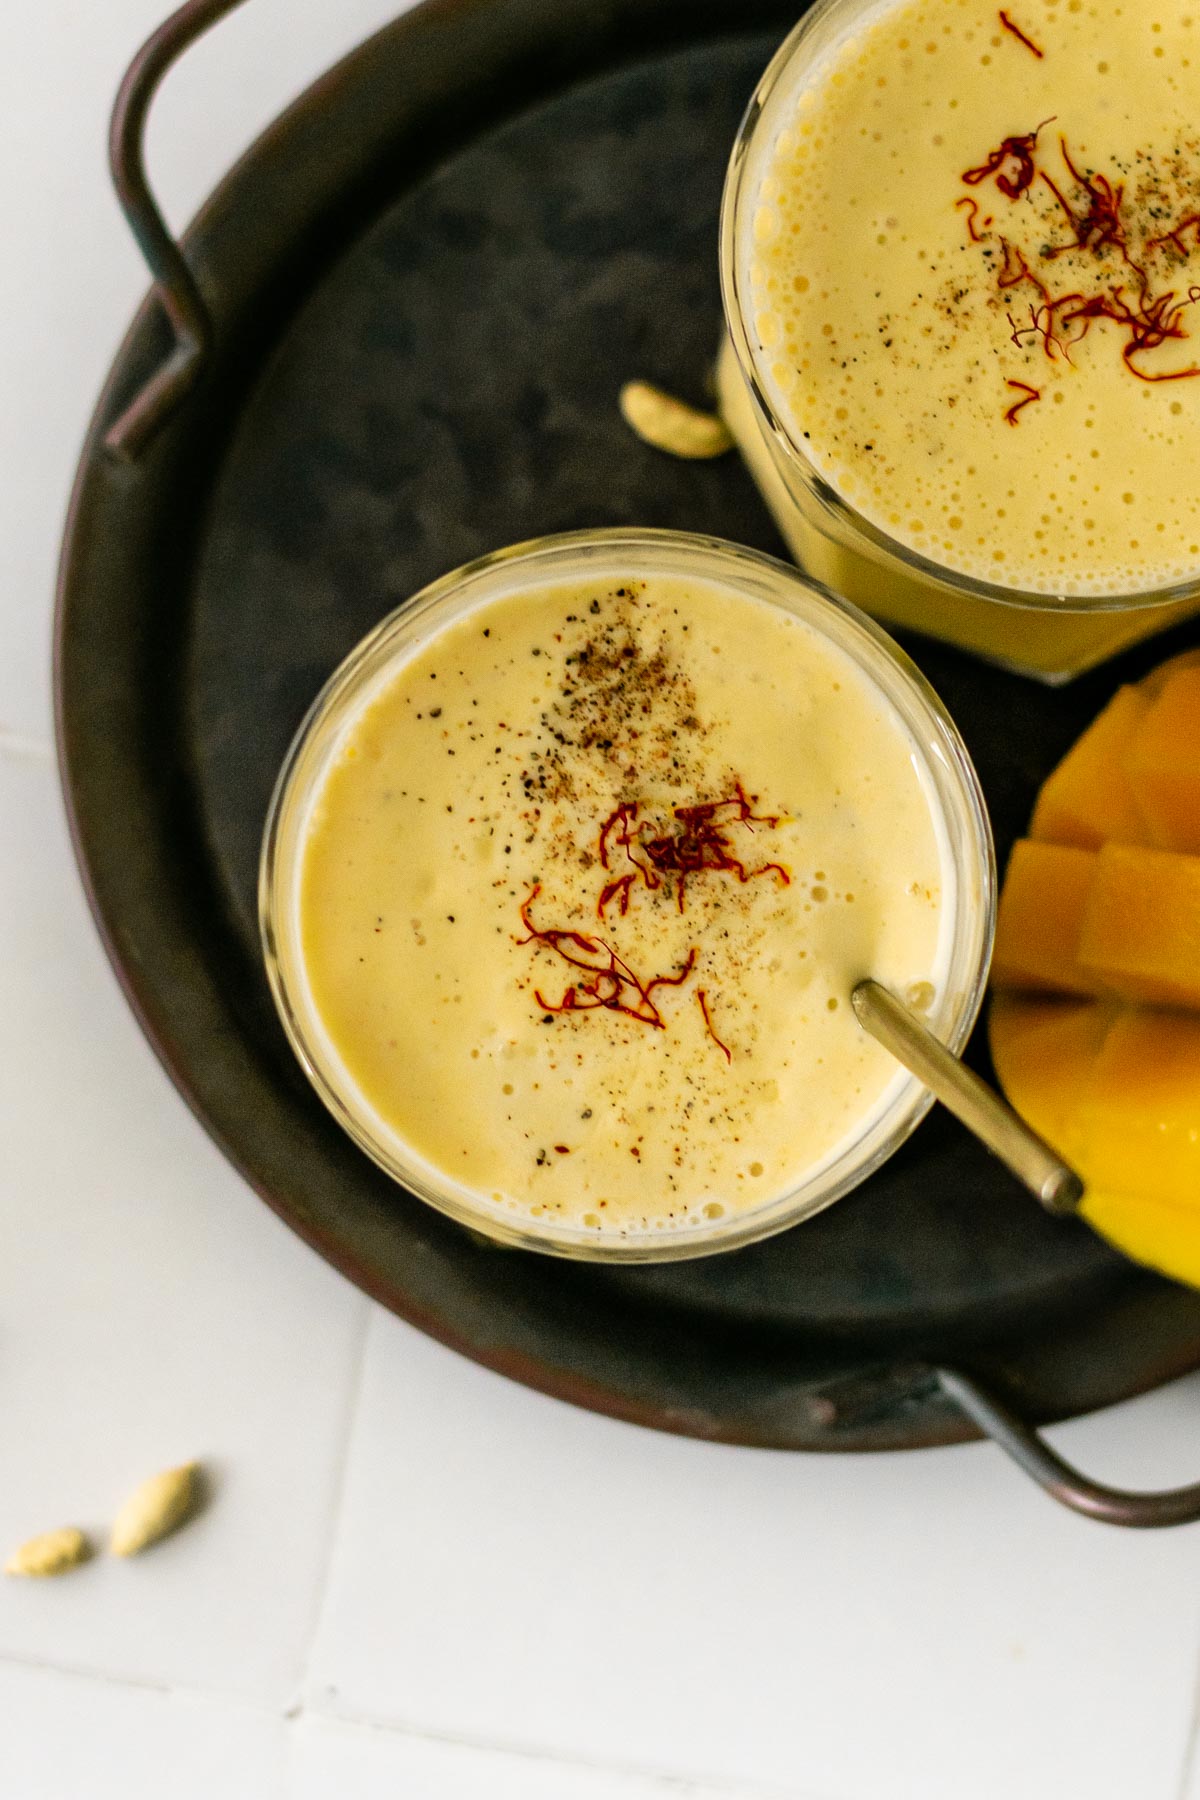 a glass of mango lassi topped with saffron and ground cardamom